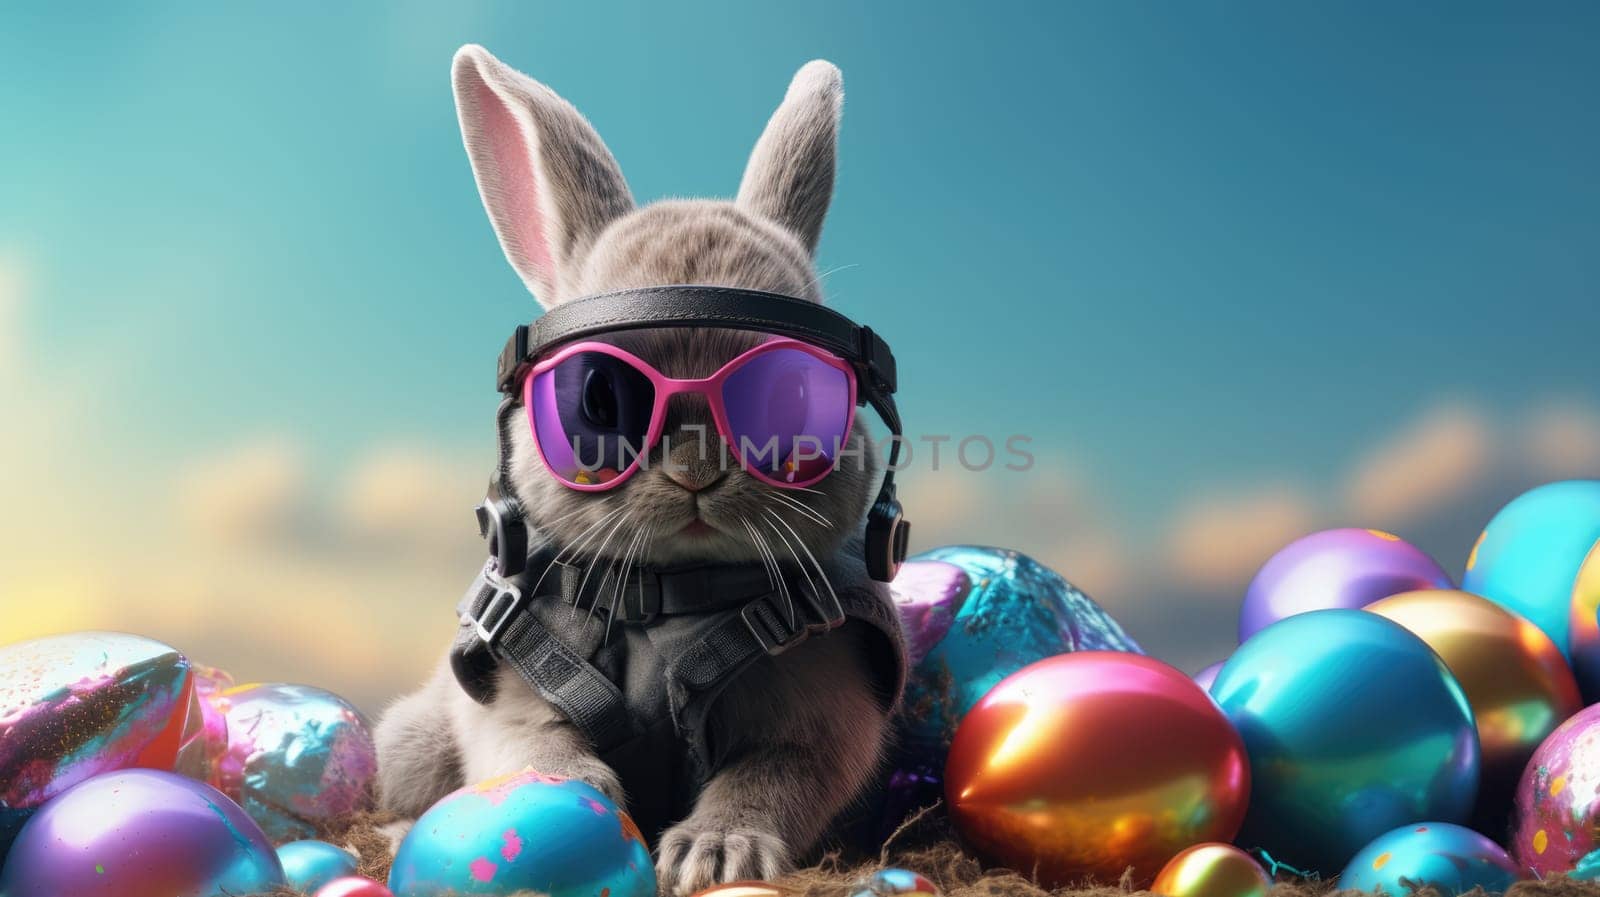 A stylish white rabbit wearing retro goggles and a fashionable outfit against a vibrant blue background. This unique and eye-catching image is sure to capture attention and leave a lasting impression.